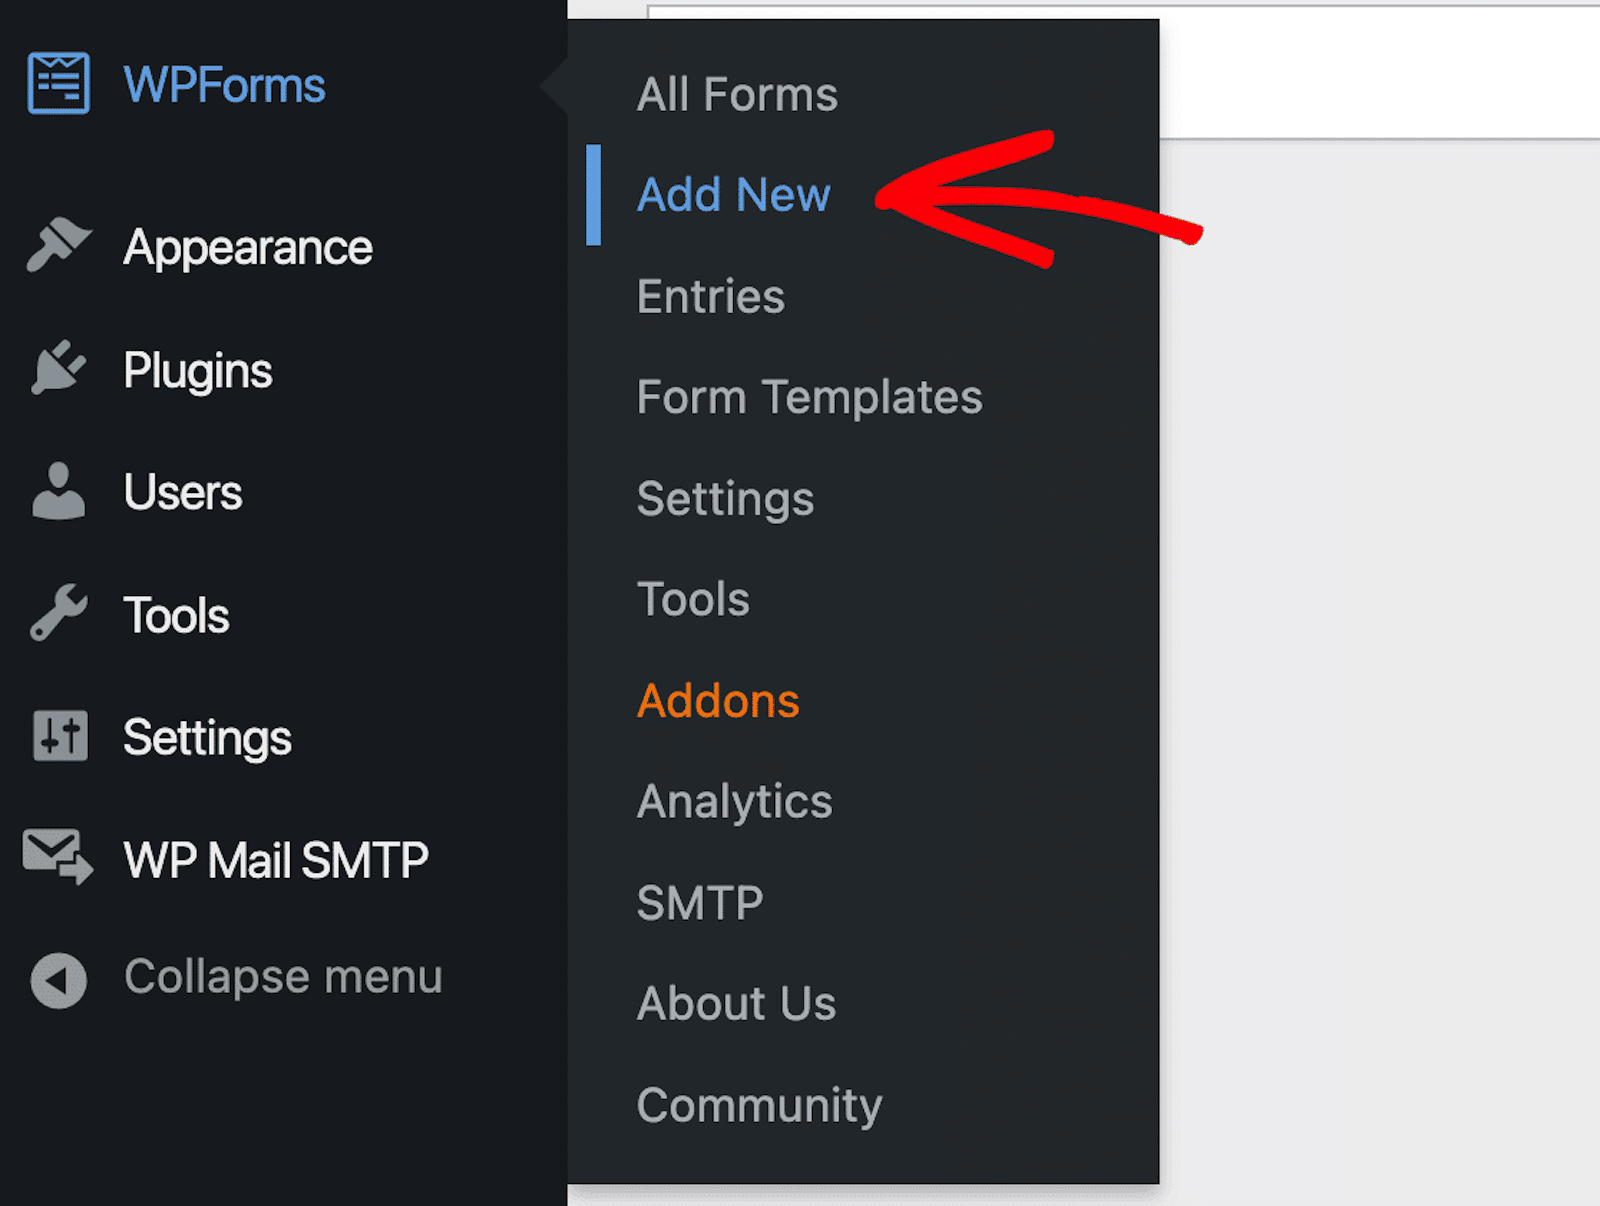 Adding a new form in the WPForms tab